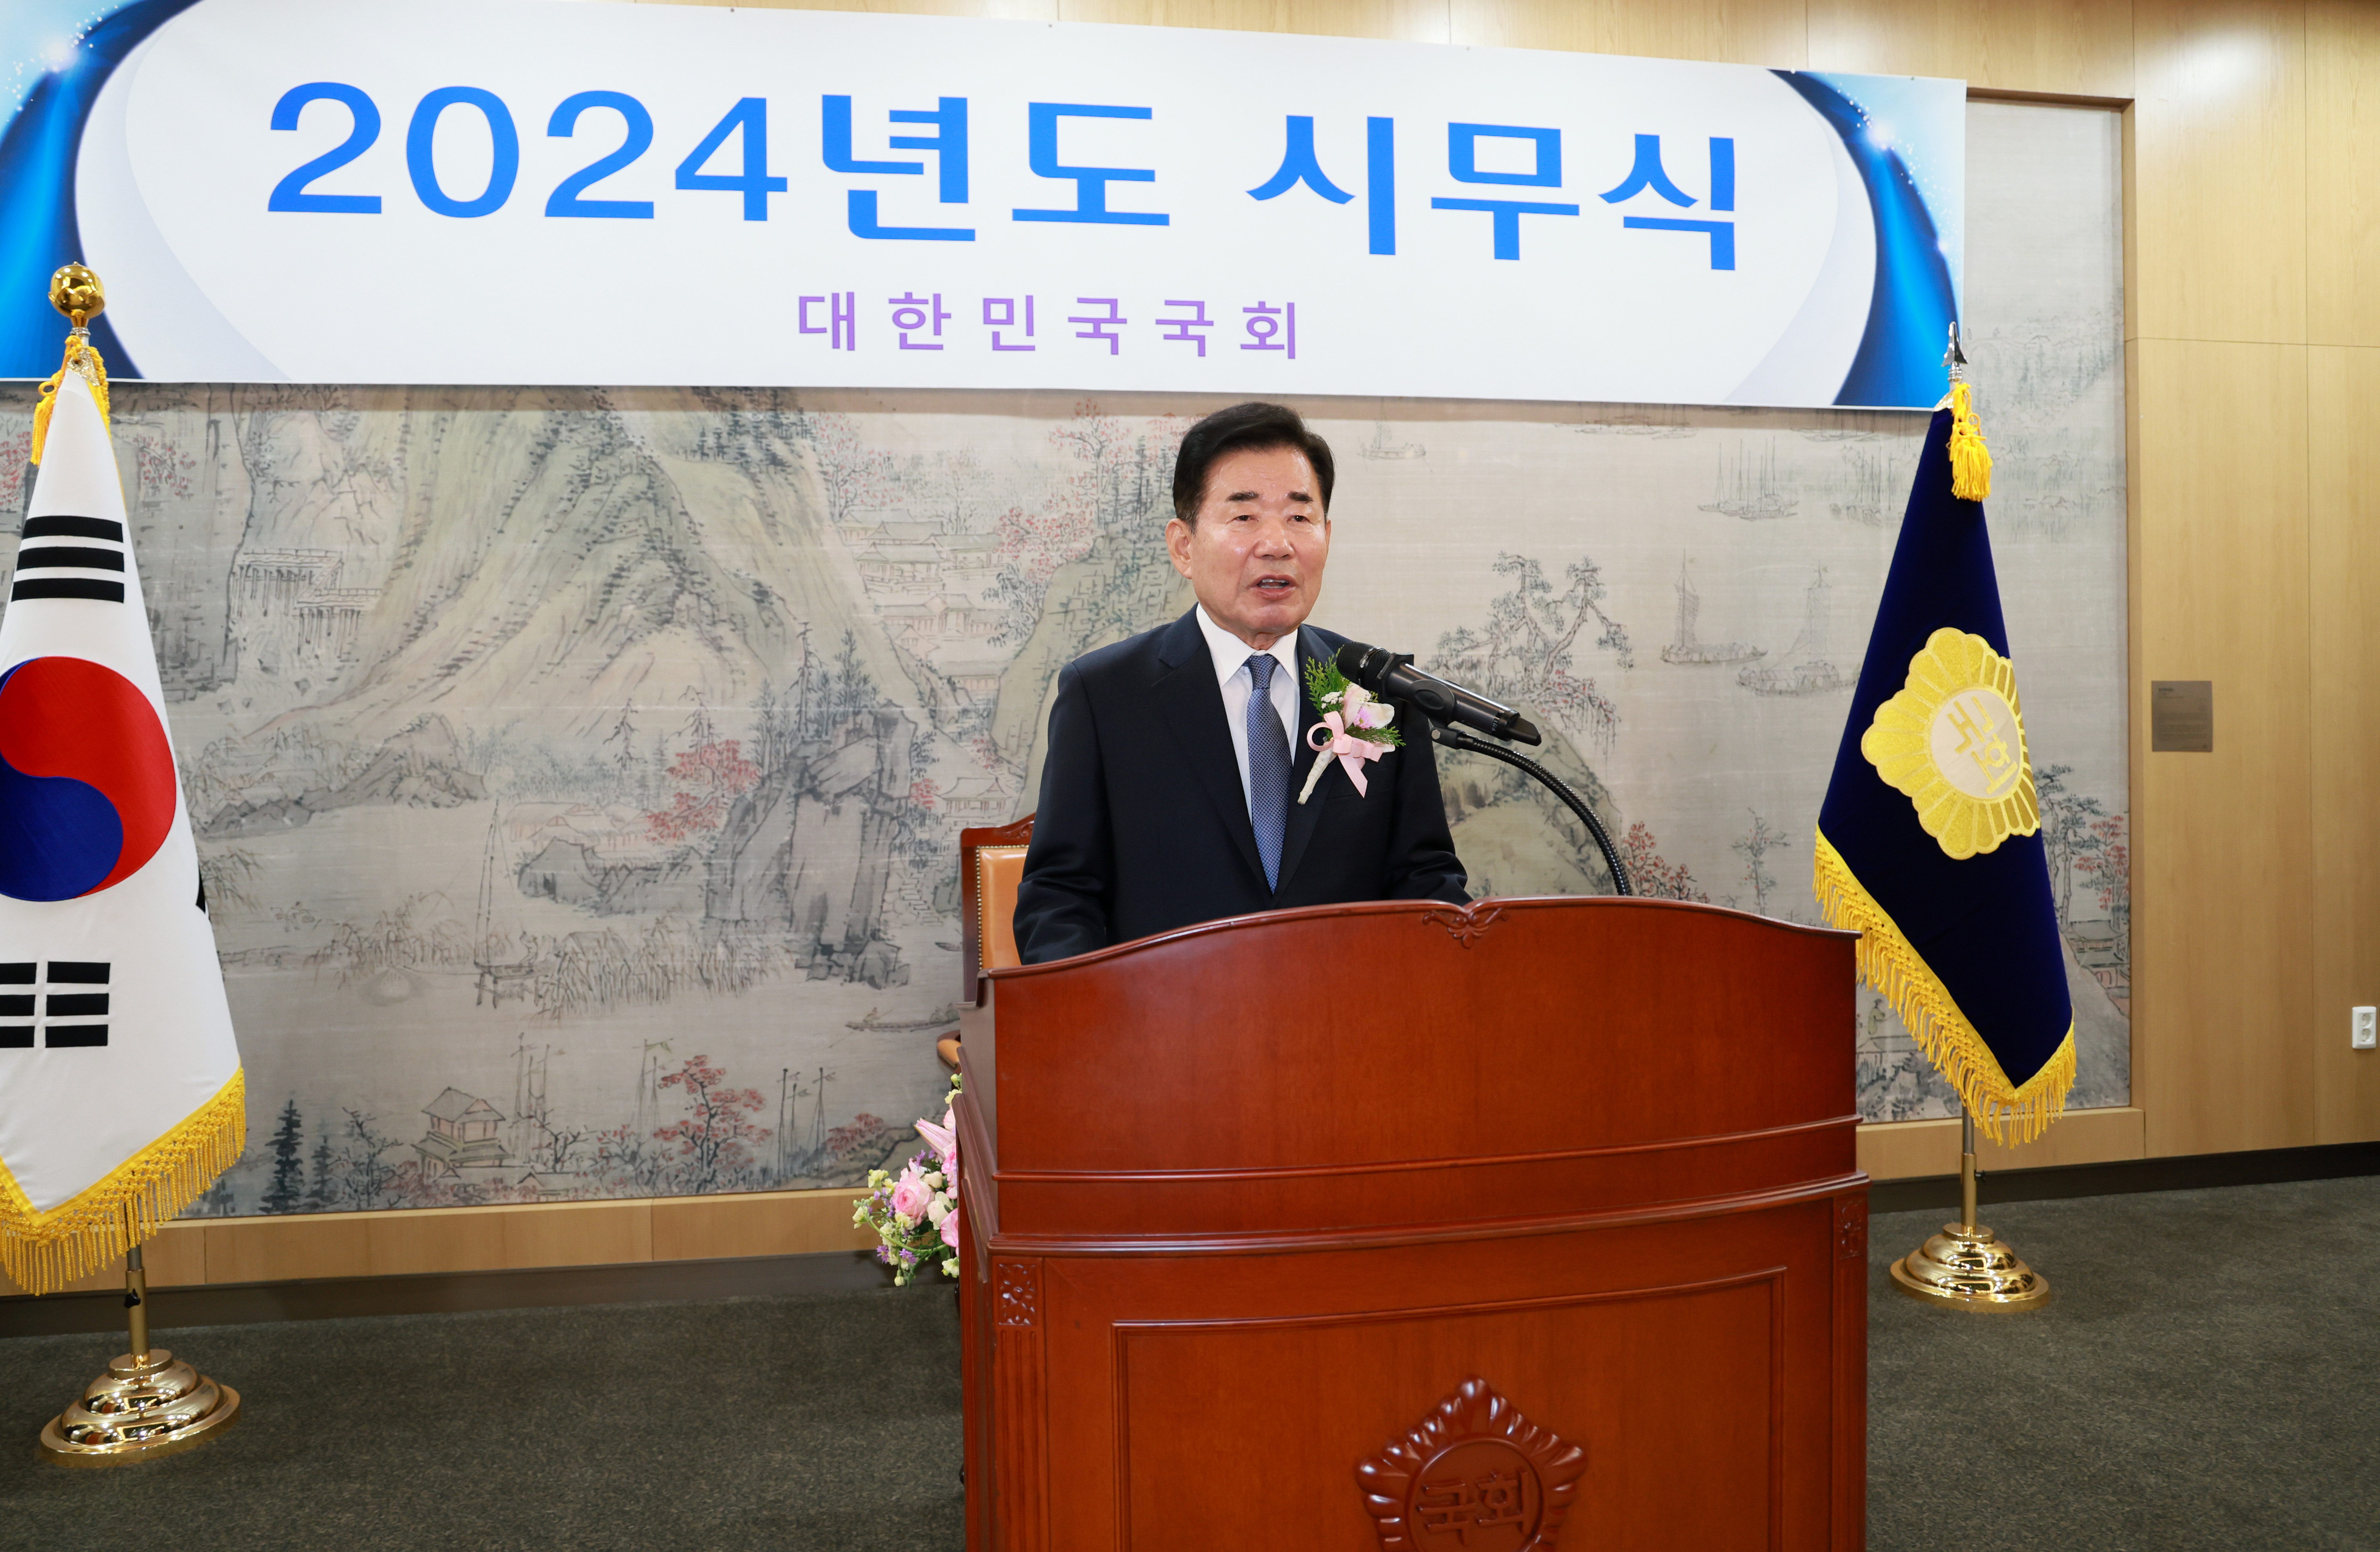 Speaker attends Assembly&rsquo;s New Year kick-off ceremony 관련사진 1 보기